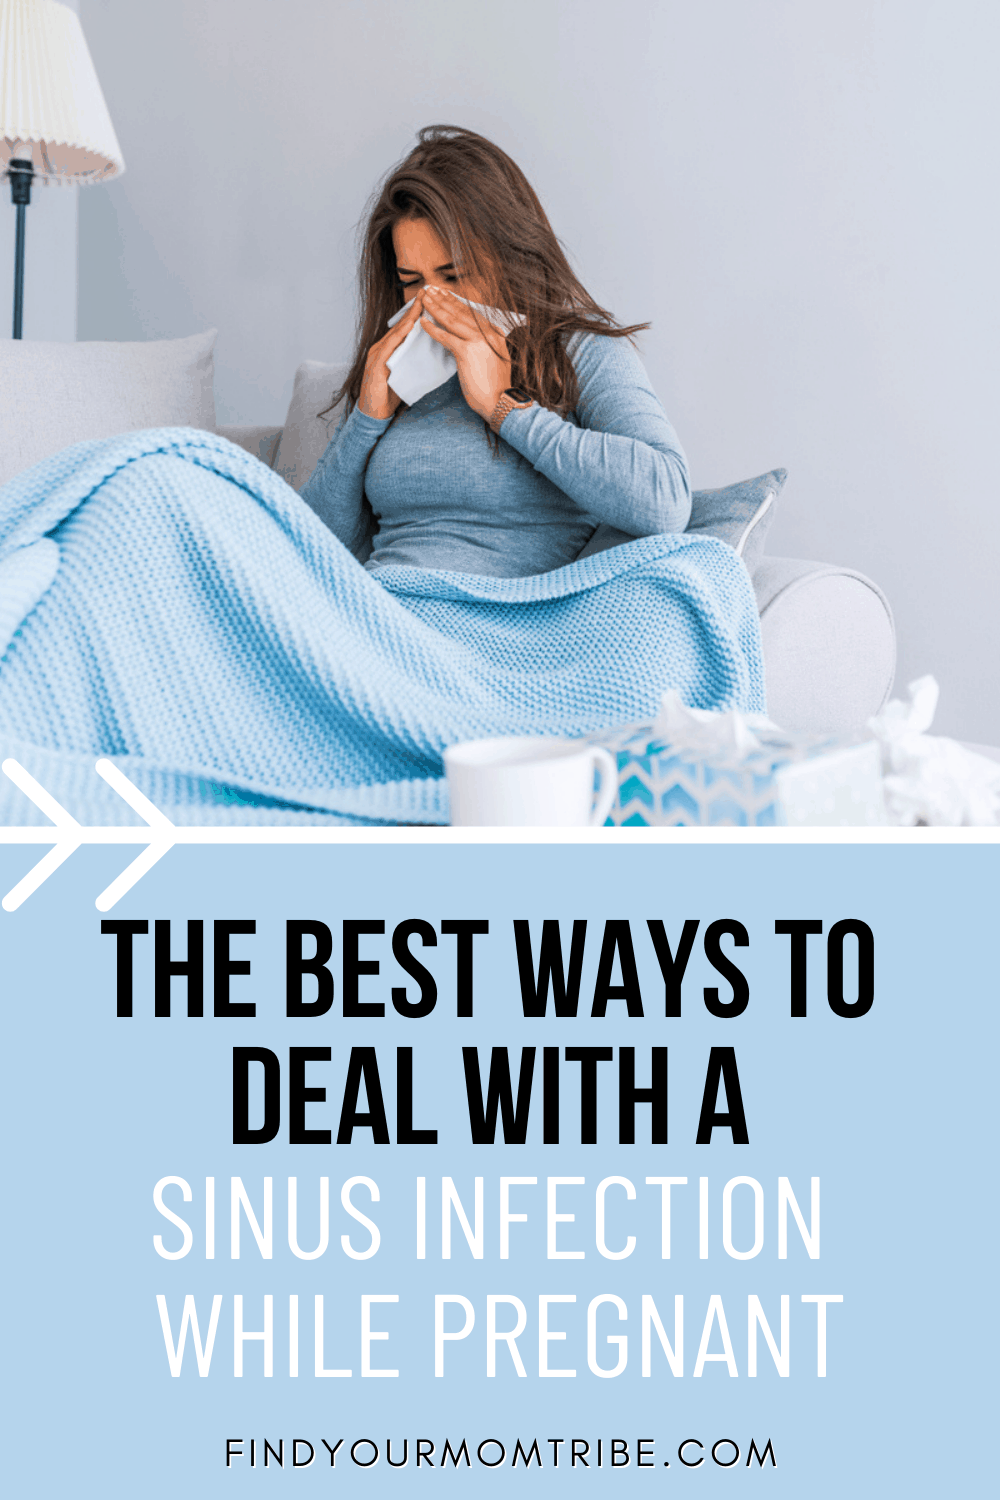 Pinterest sinus infection while pregnant